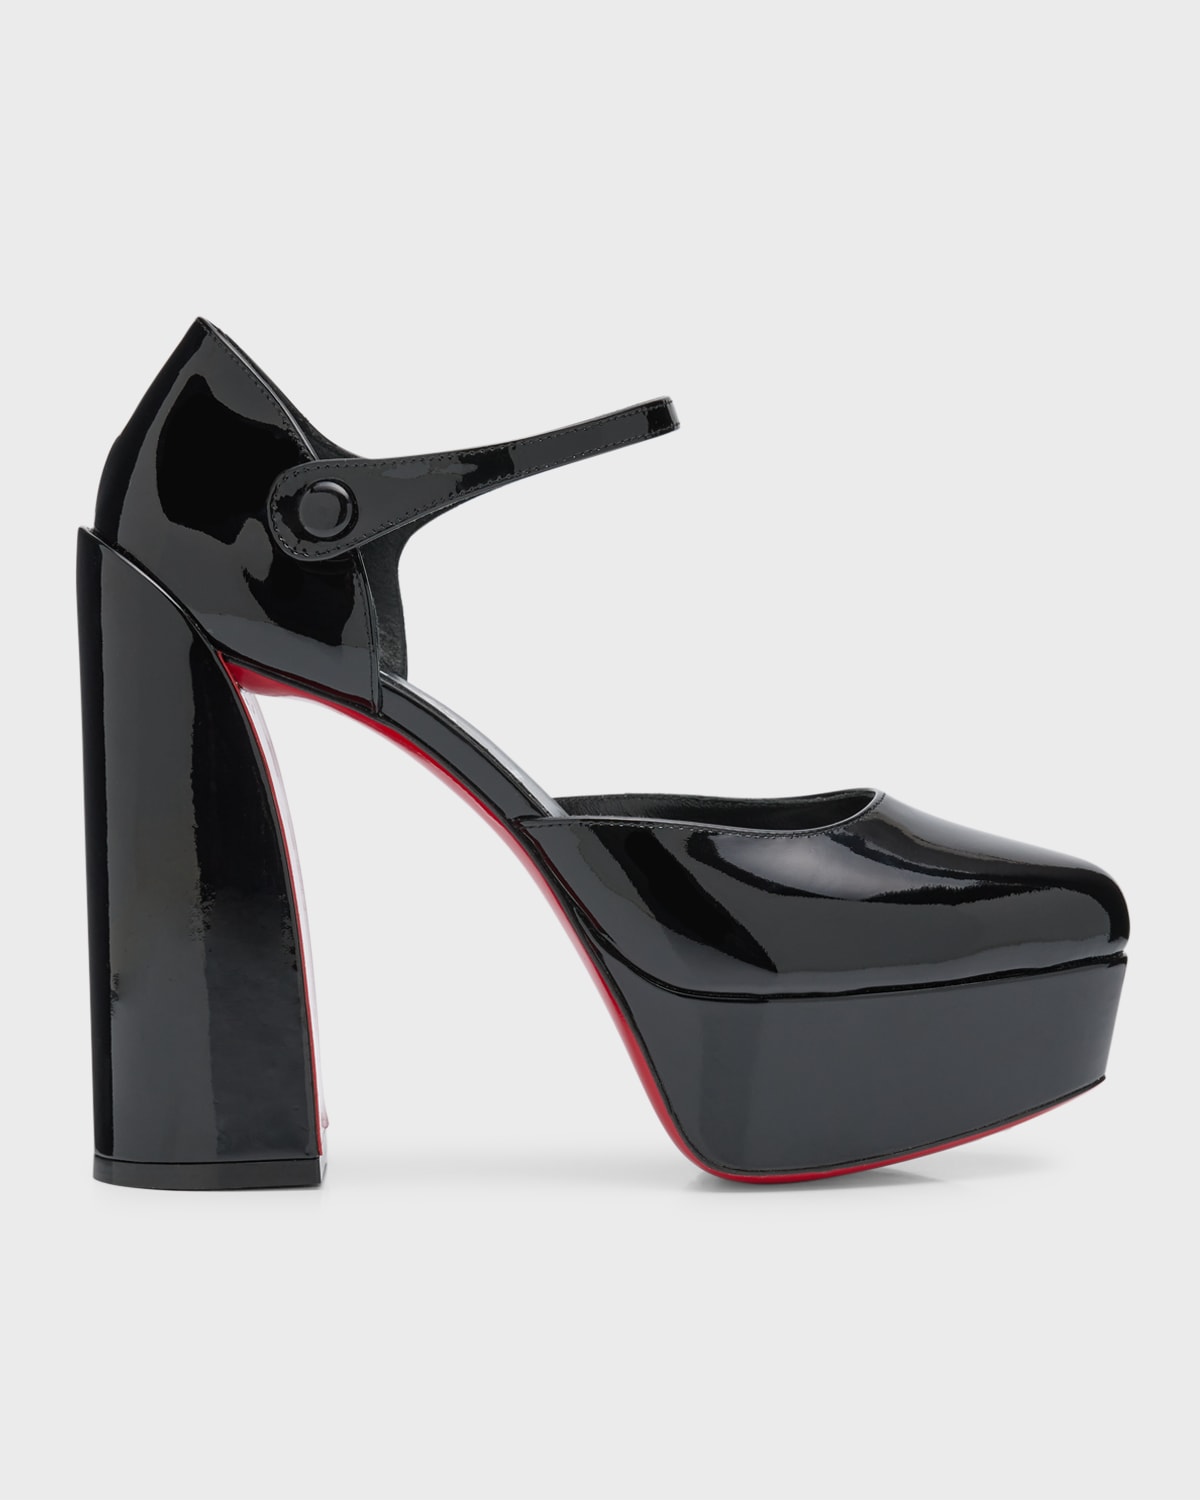 Christian Louboutin Movida Patent Red Sole Platform Pumps In Black